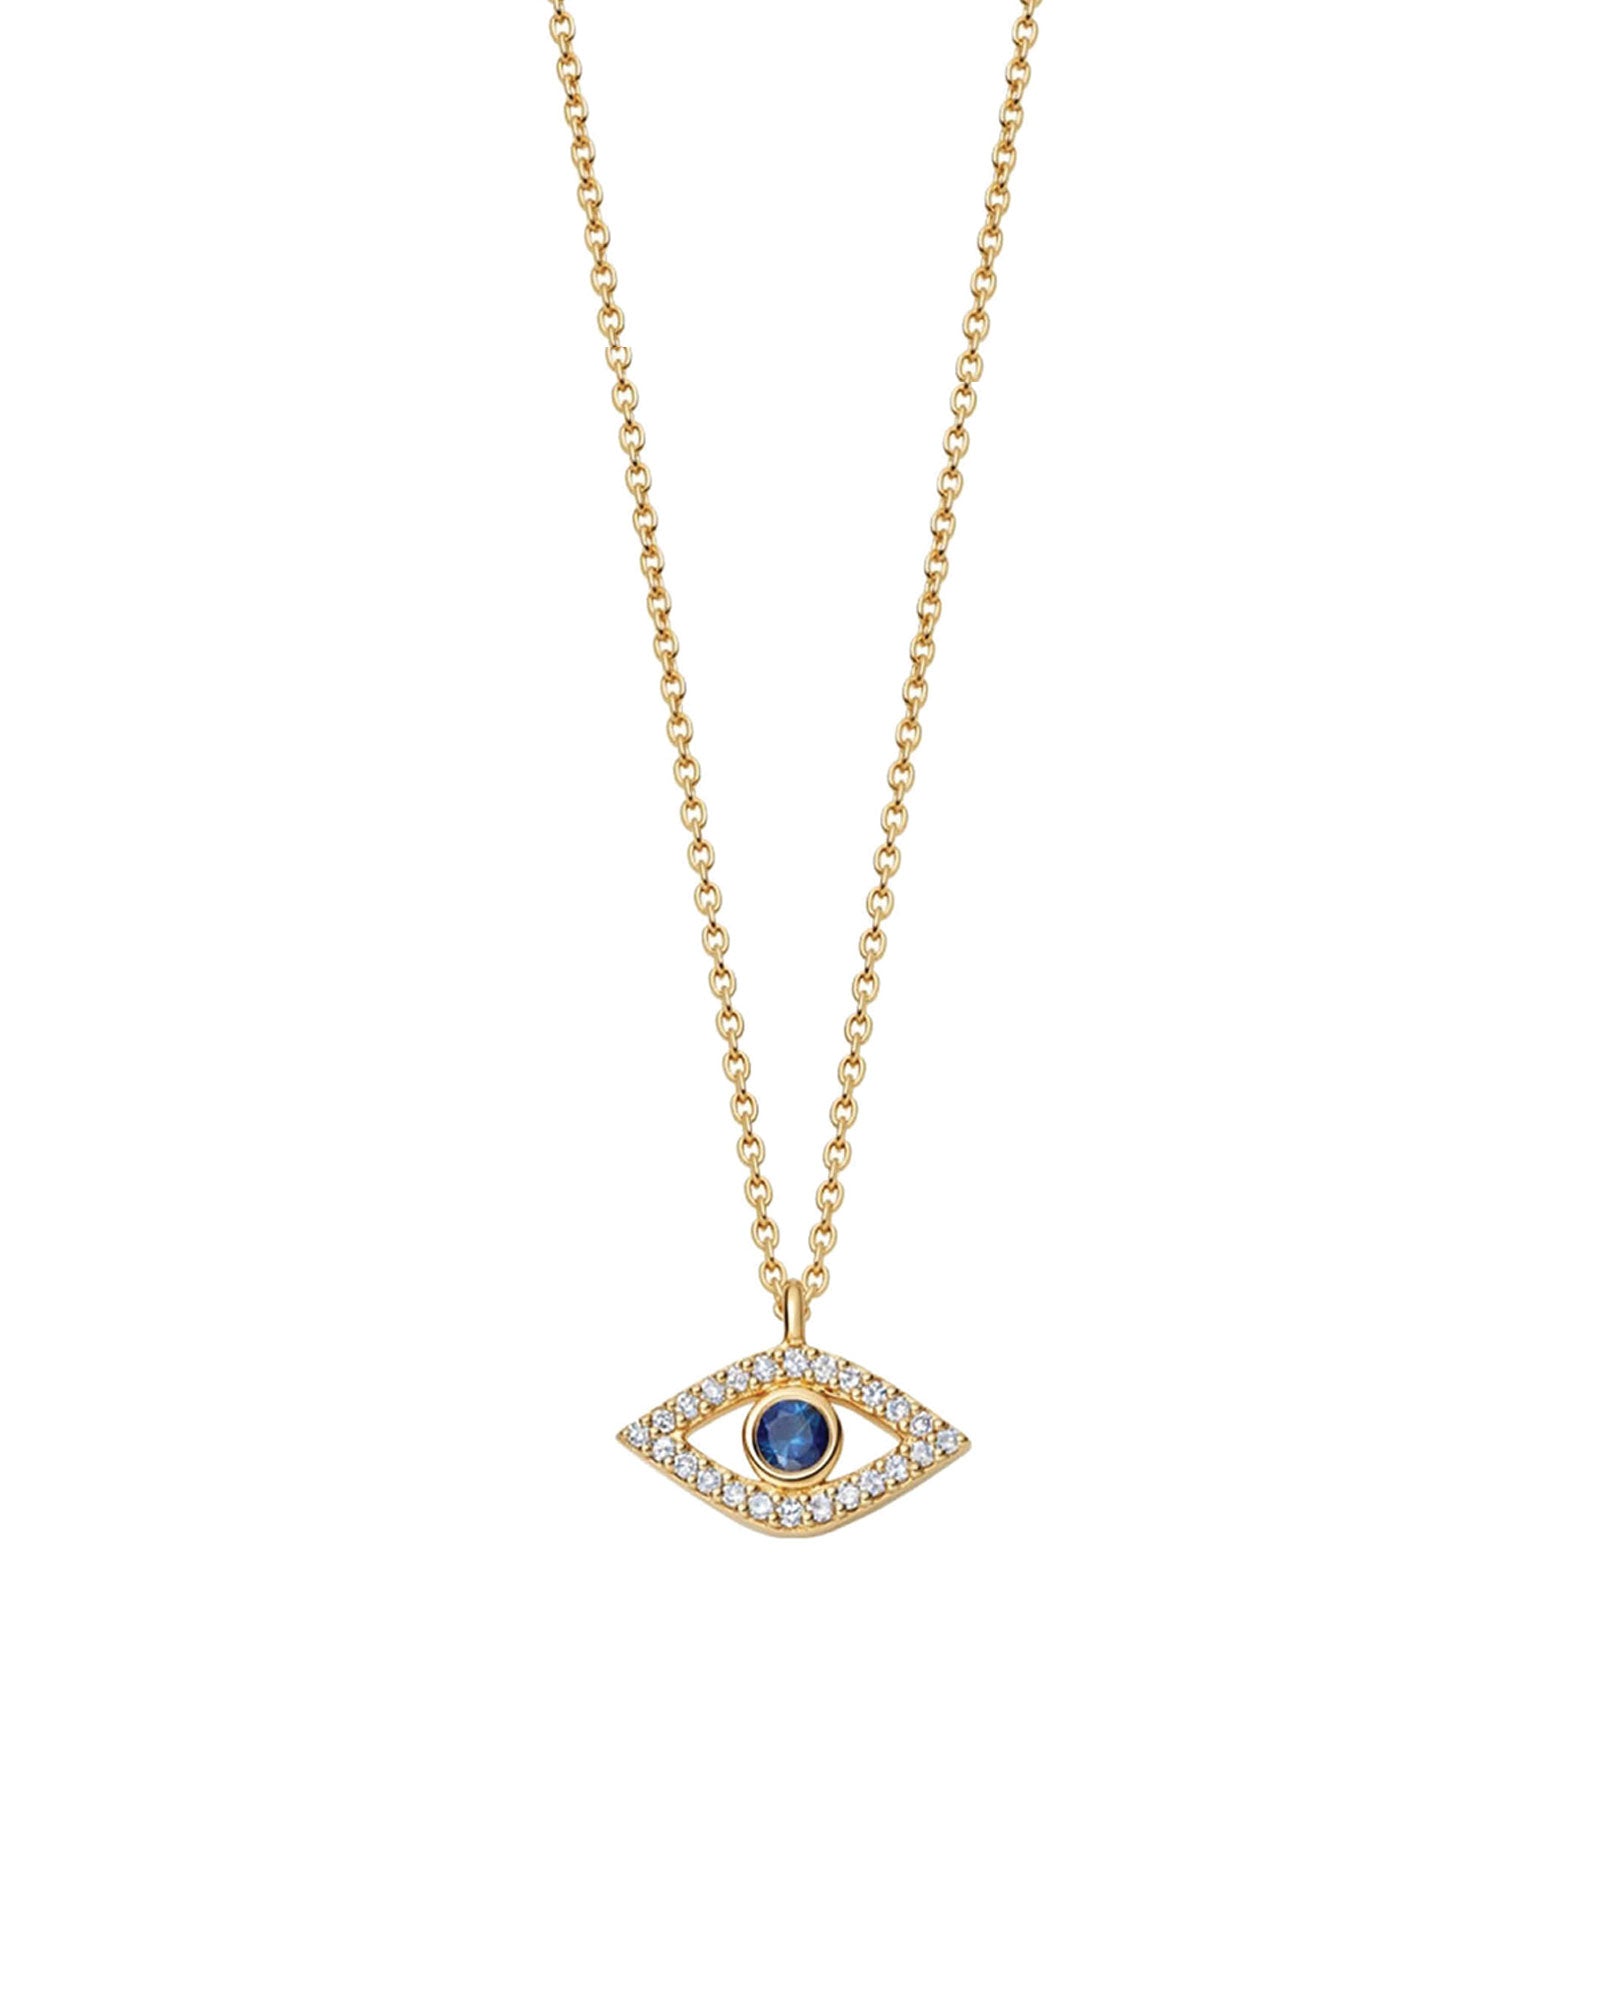 CUBIC ZIRCONIA EVIL EYE NECKLACE IN 14K YELLOW GOLD - Pendant